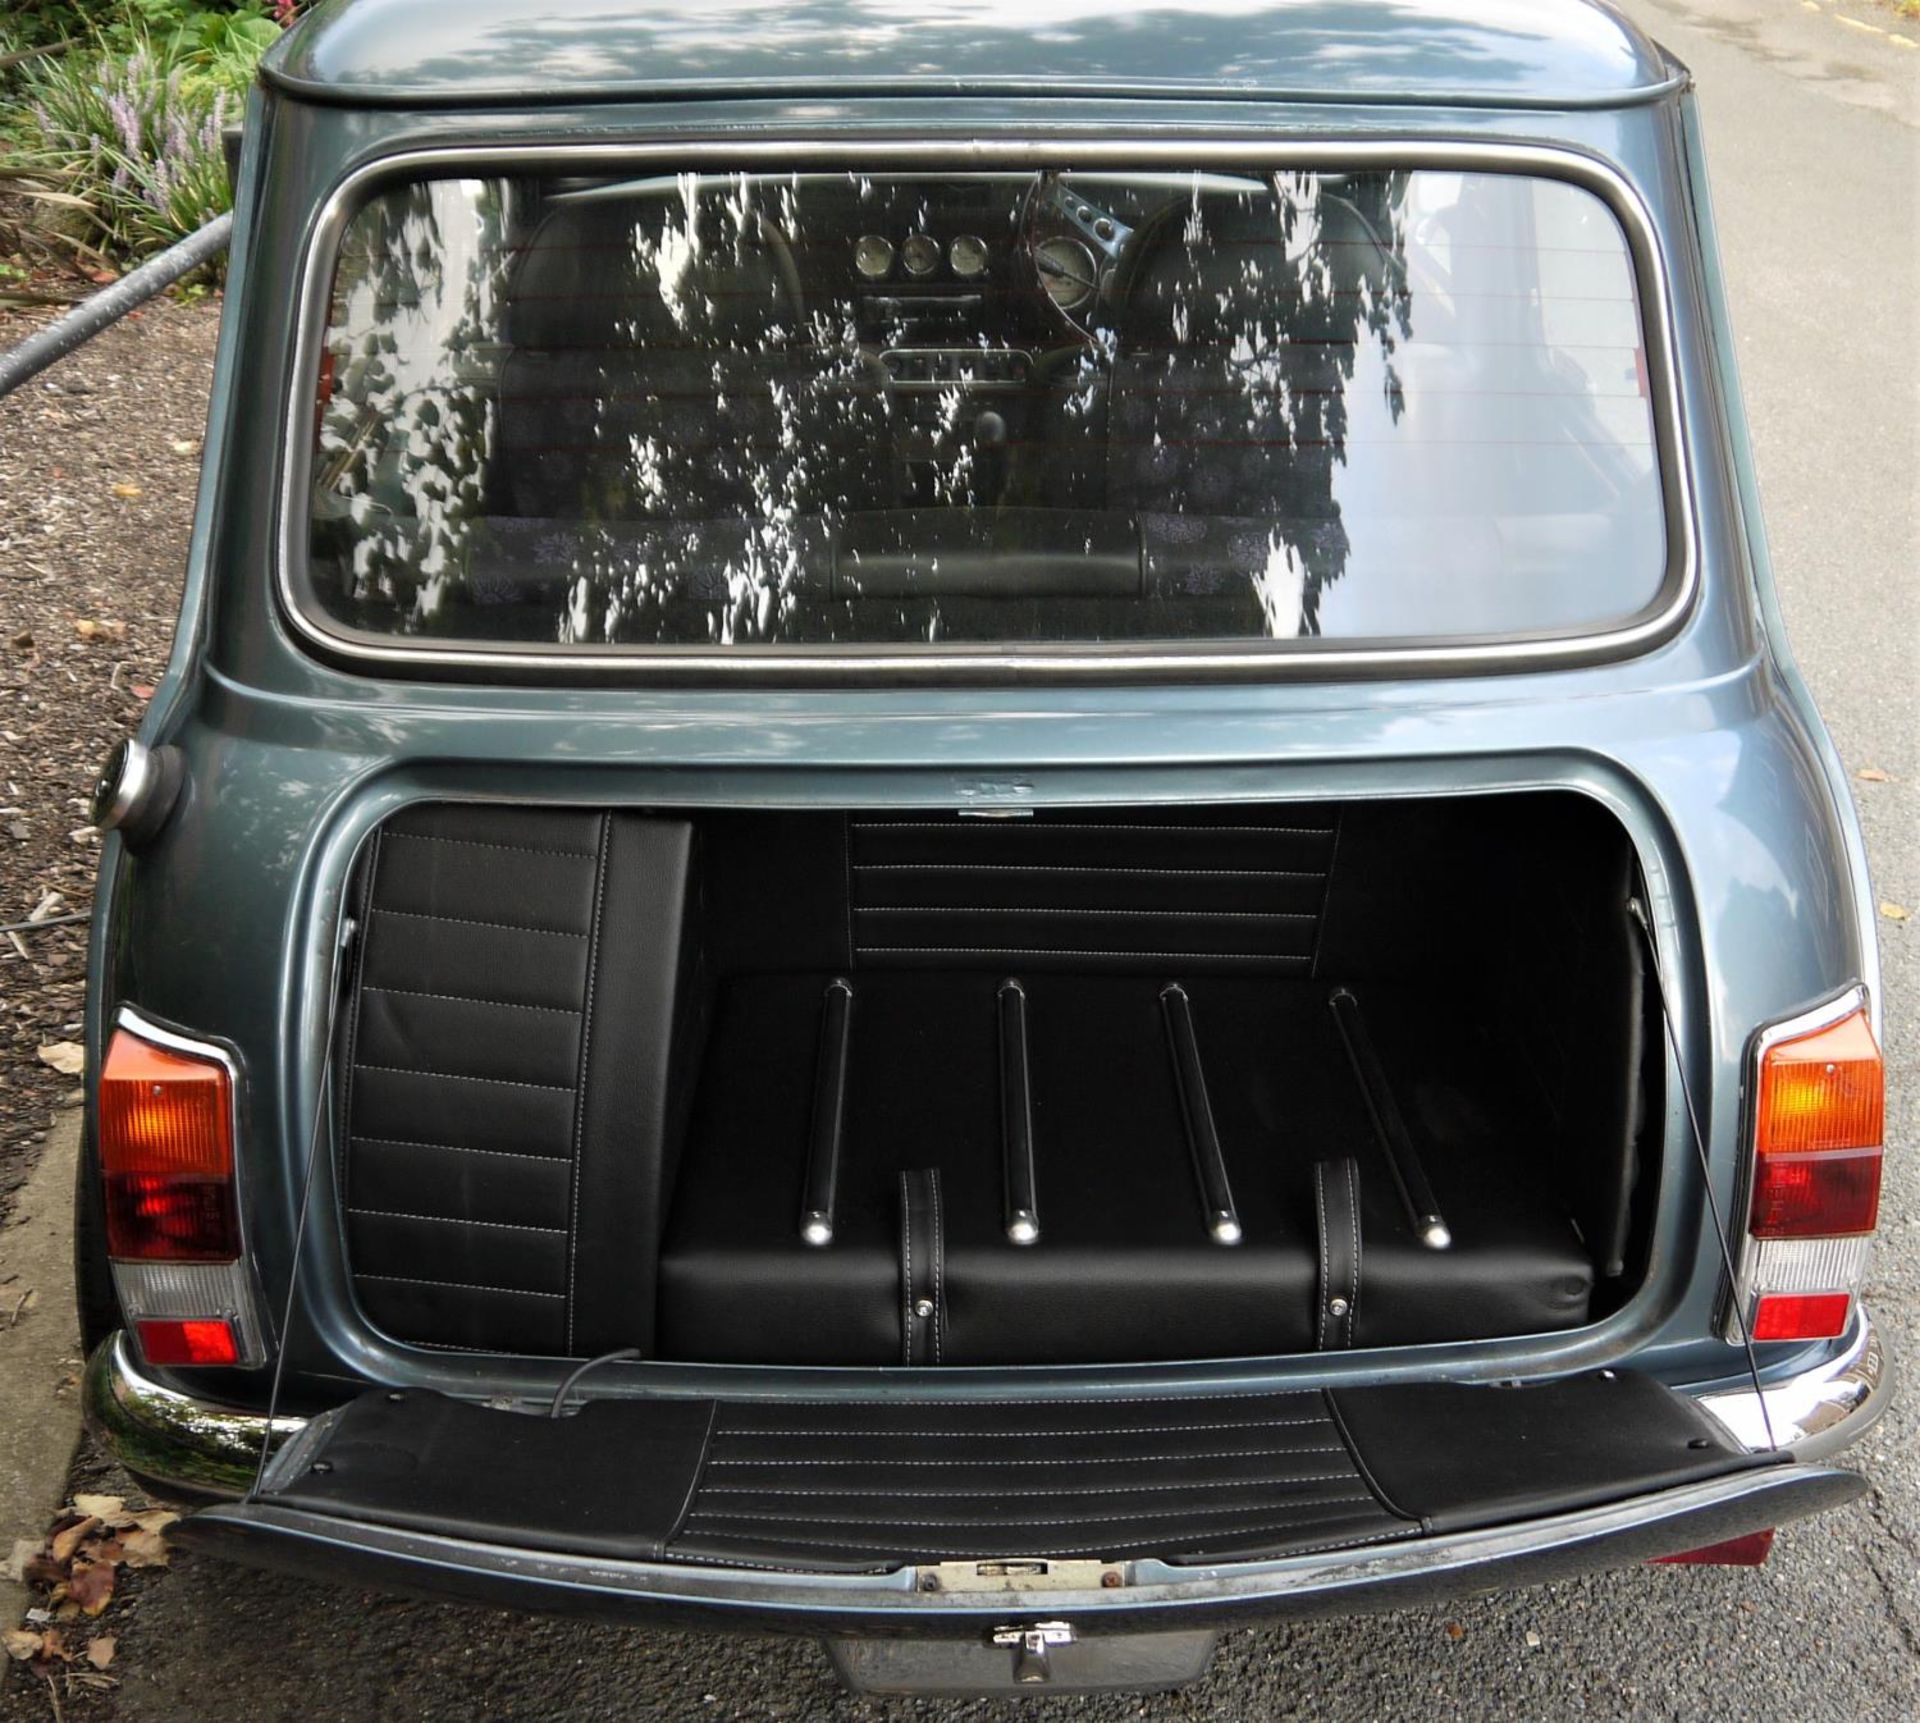 1991 ROVER MINI NEON Registration Number: J774 NWD Recorded Mileage: 58,000 miles Chassis Number: - Image 10 of 24